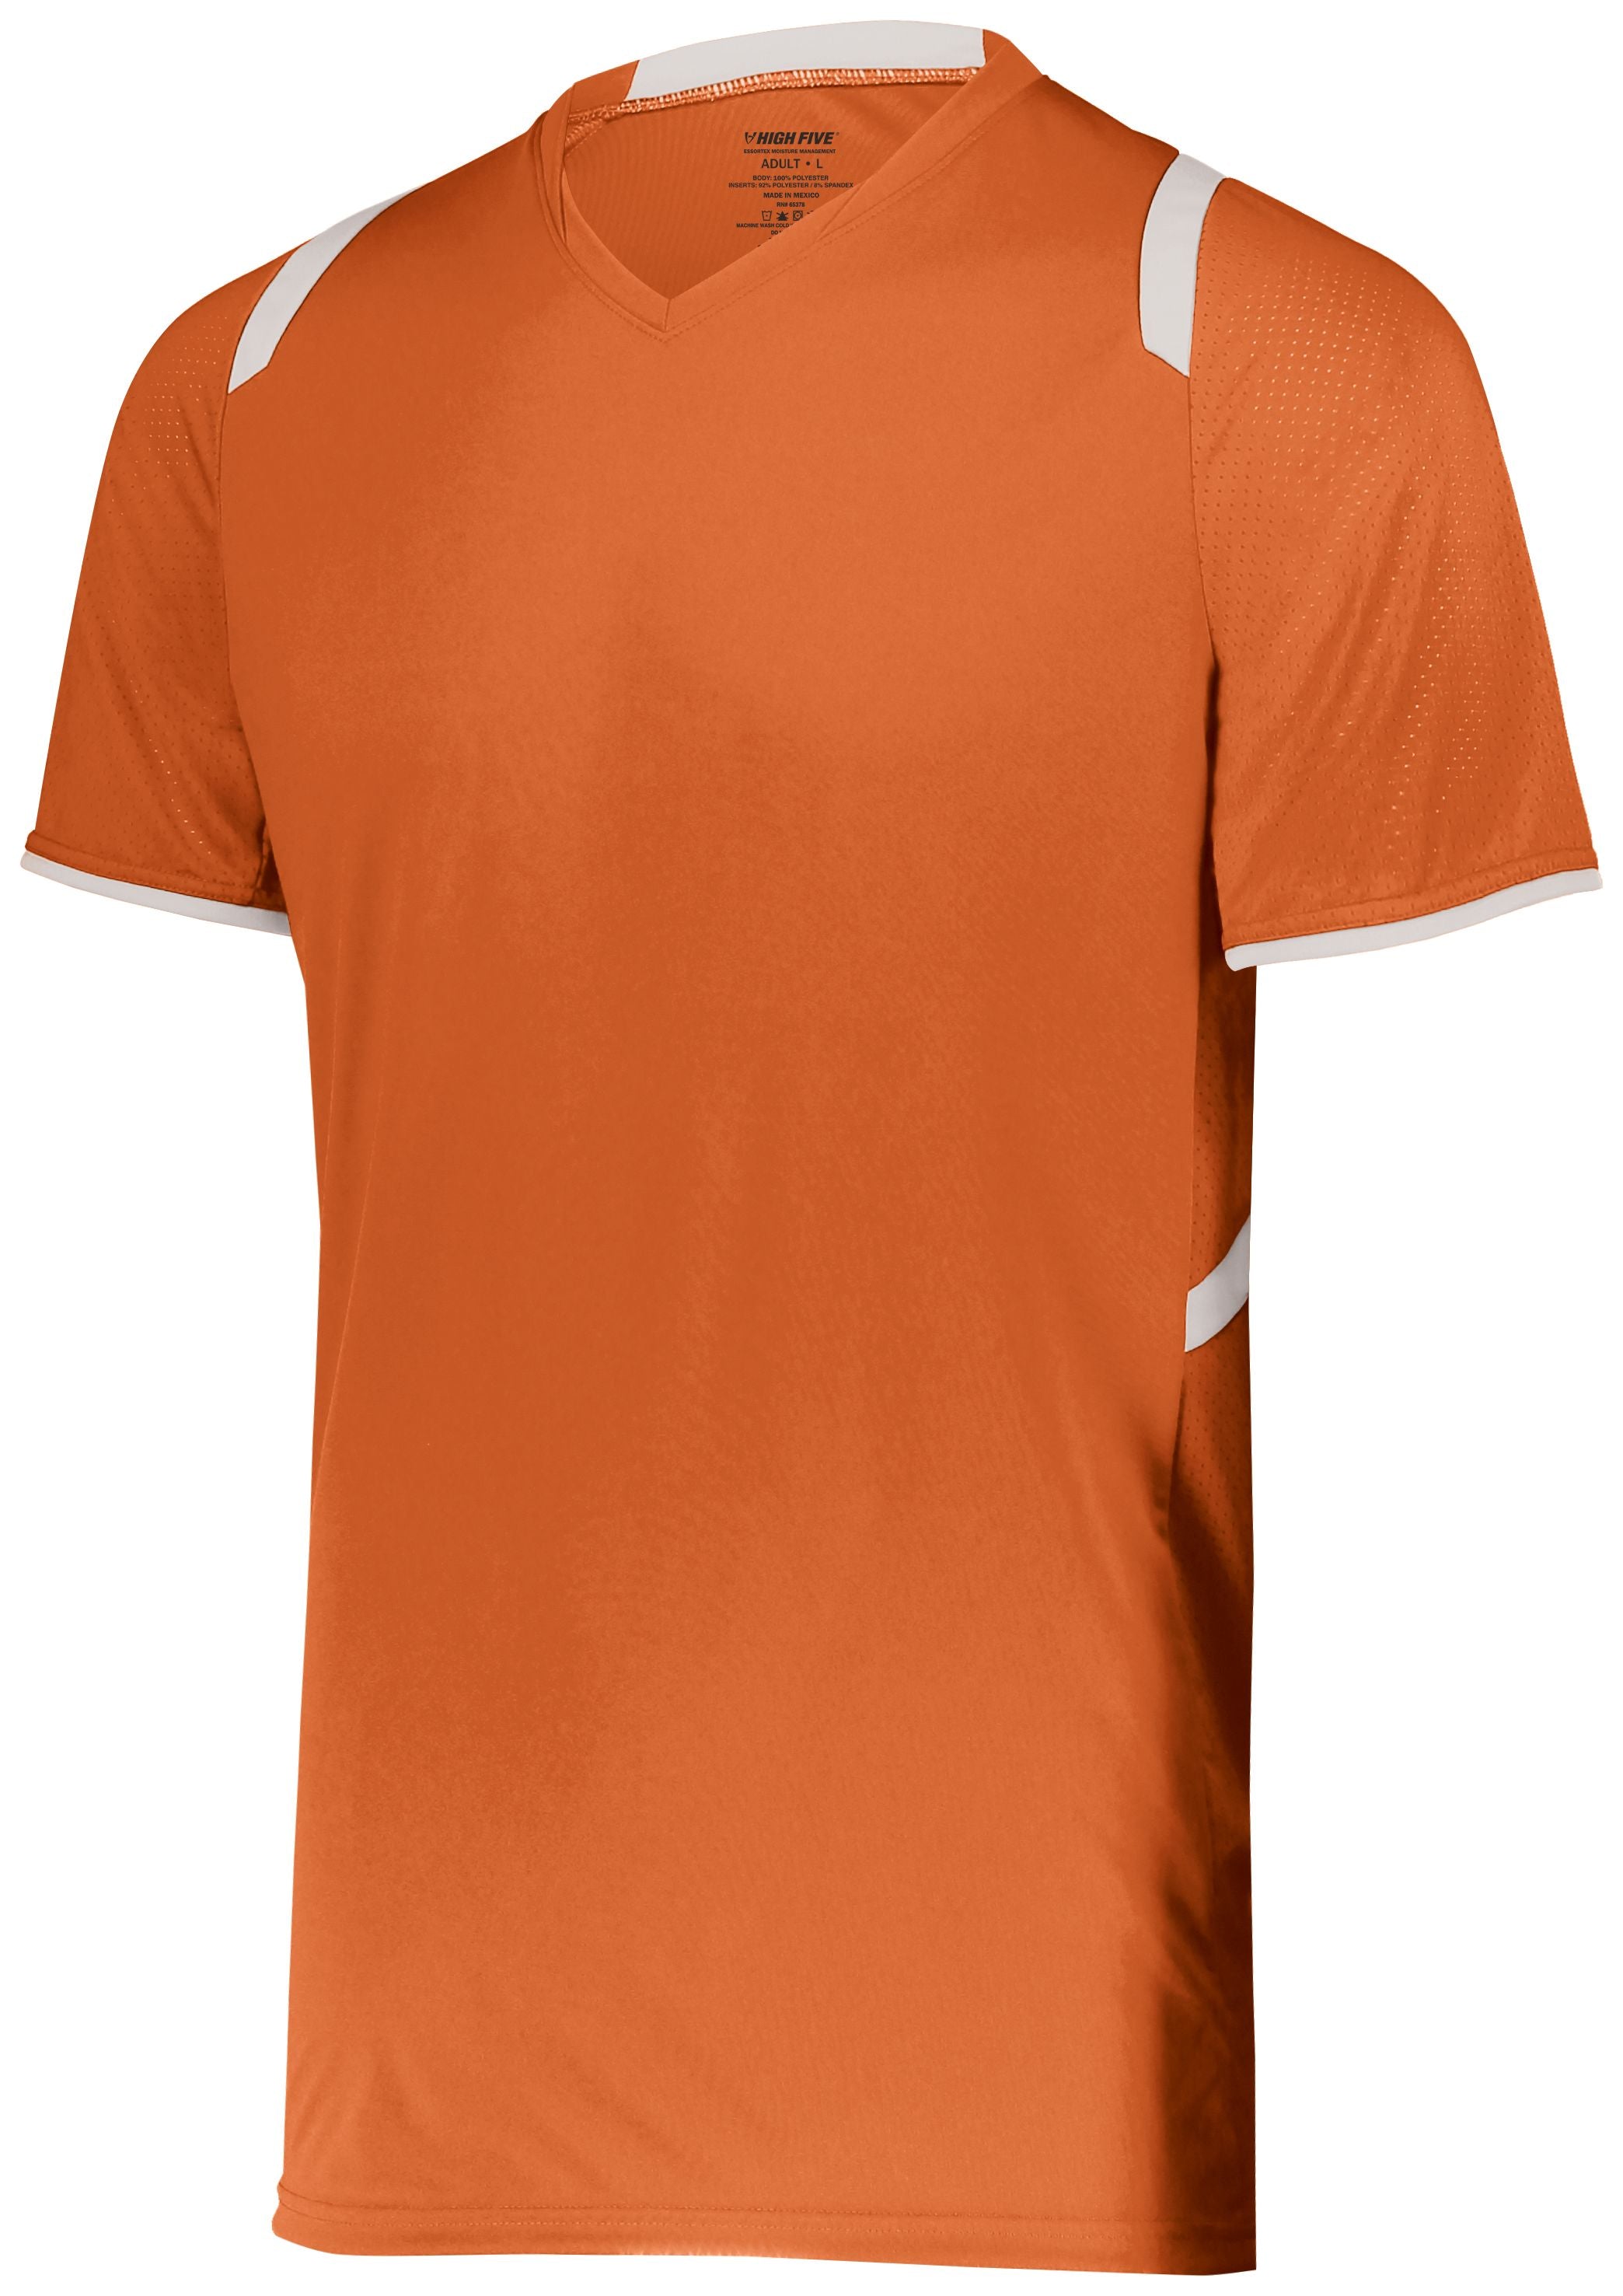 High 5 Youth Millennium Soccer Jersey in Orange/White  -Part of the Youth, Youth-Jersey, High5-Products, Soccer, Shirts, All-Sports-1 product lines at KanaleyCreations.com